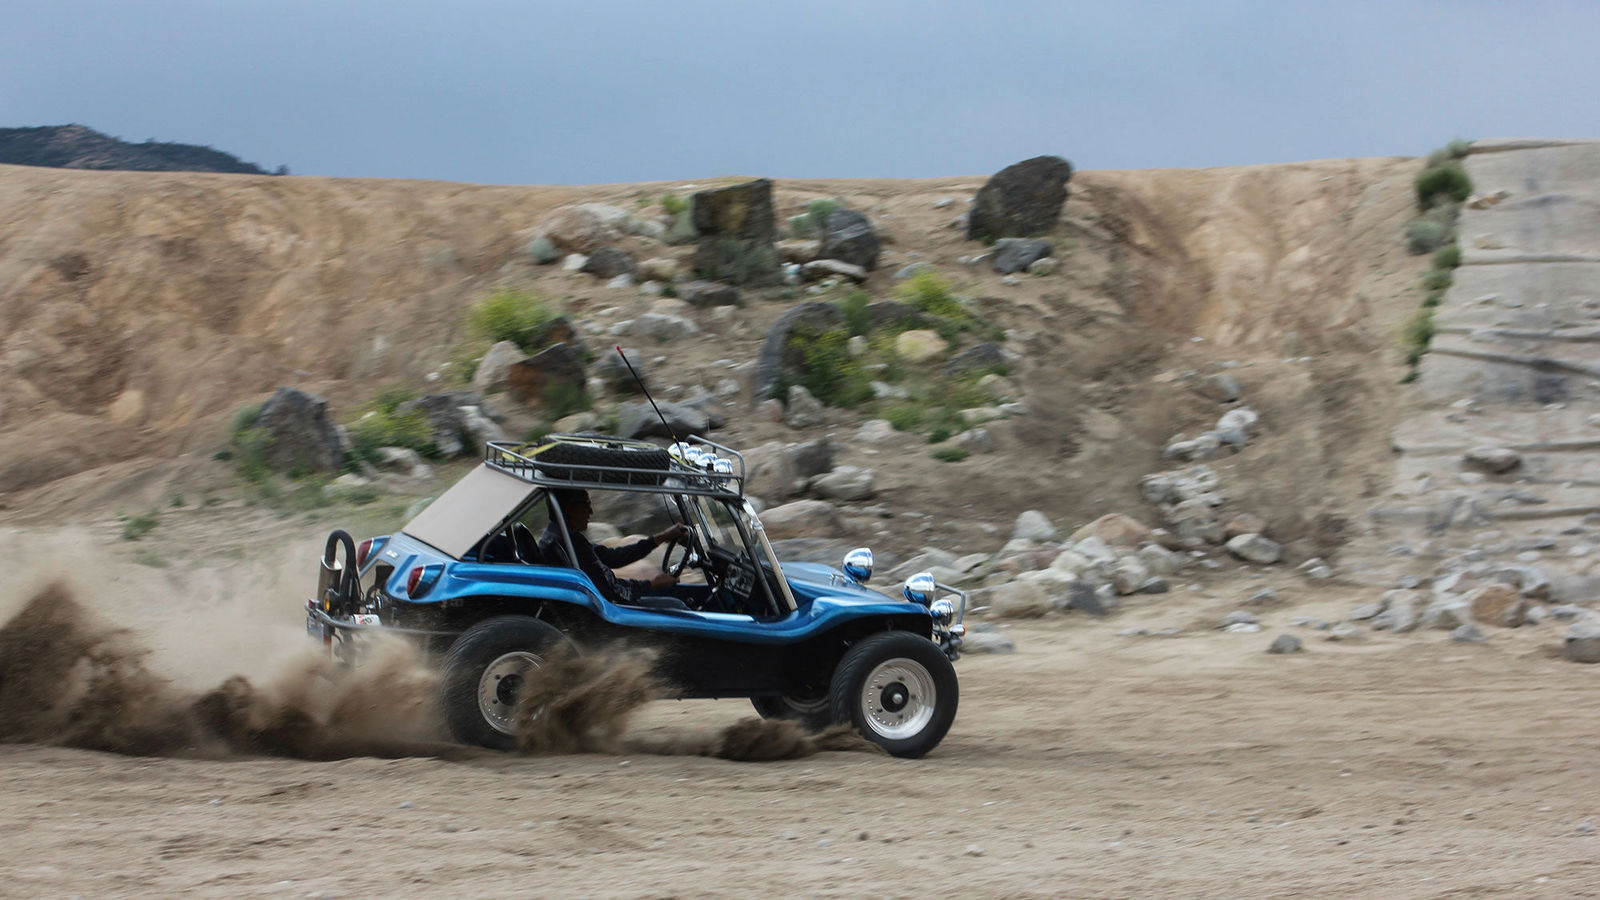 Story: Dune Buggy: Small Car, Boundless Freedom